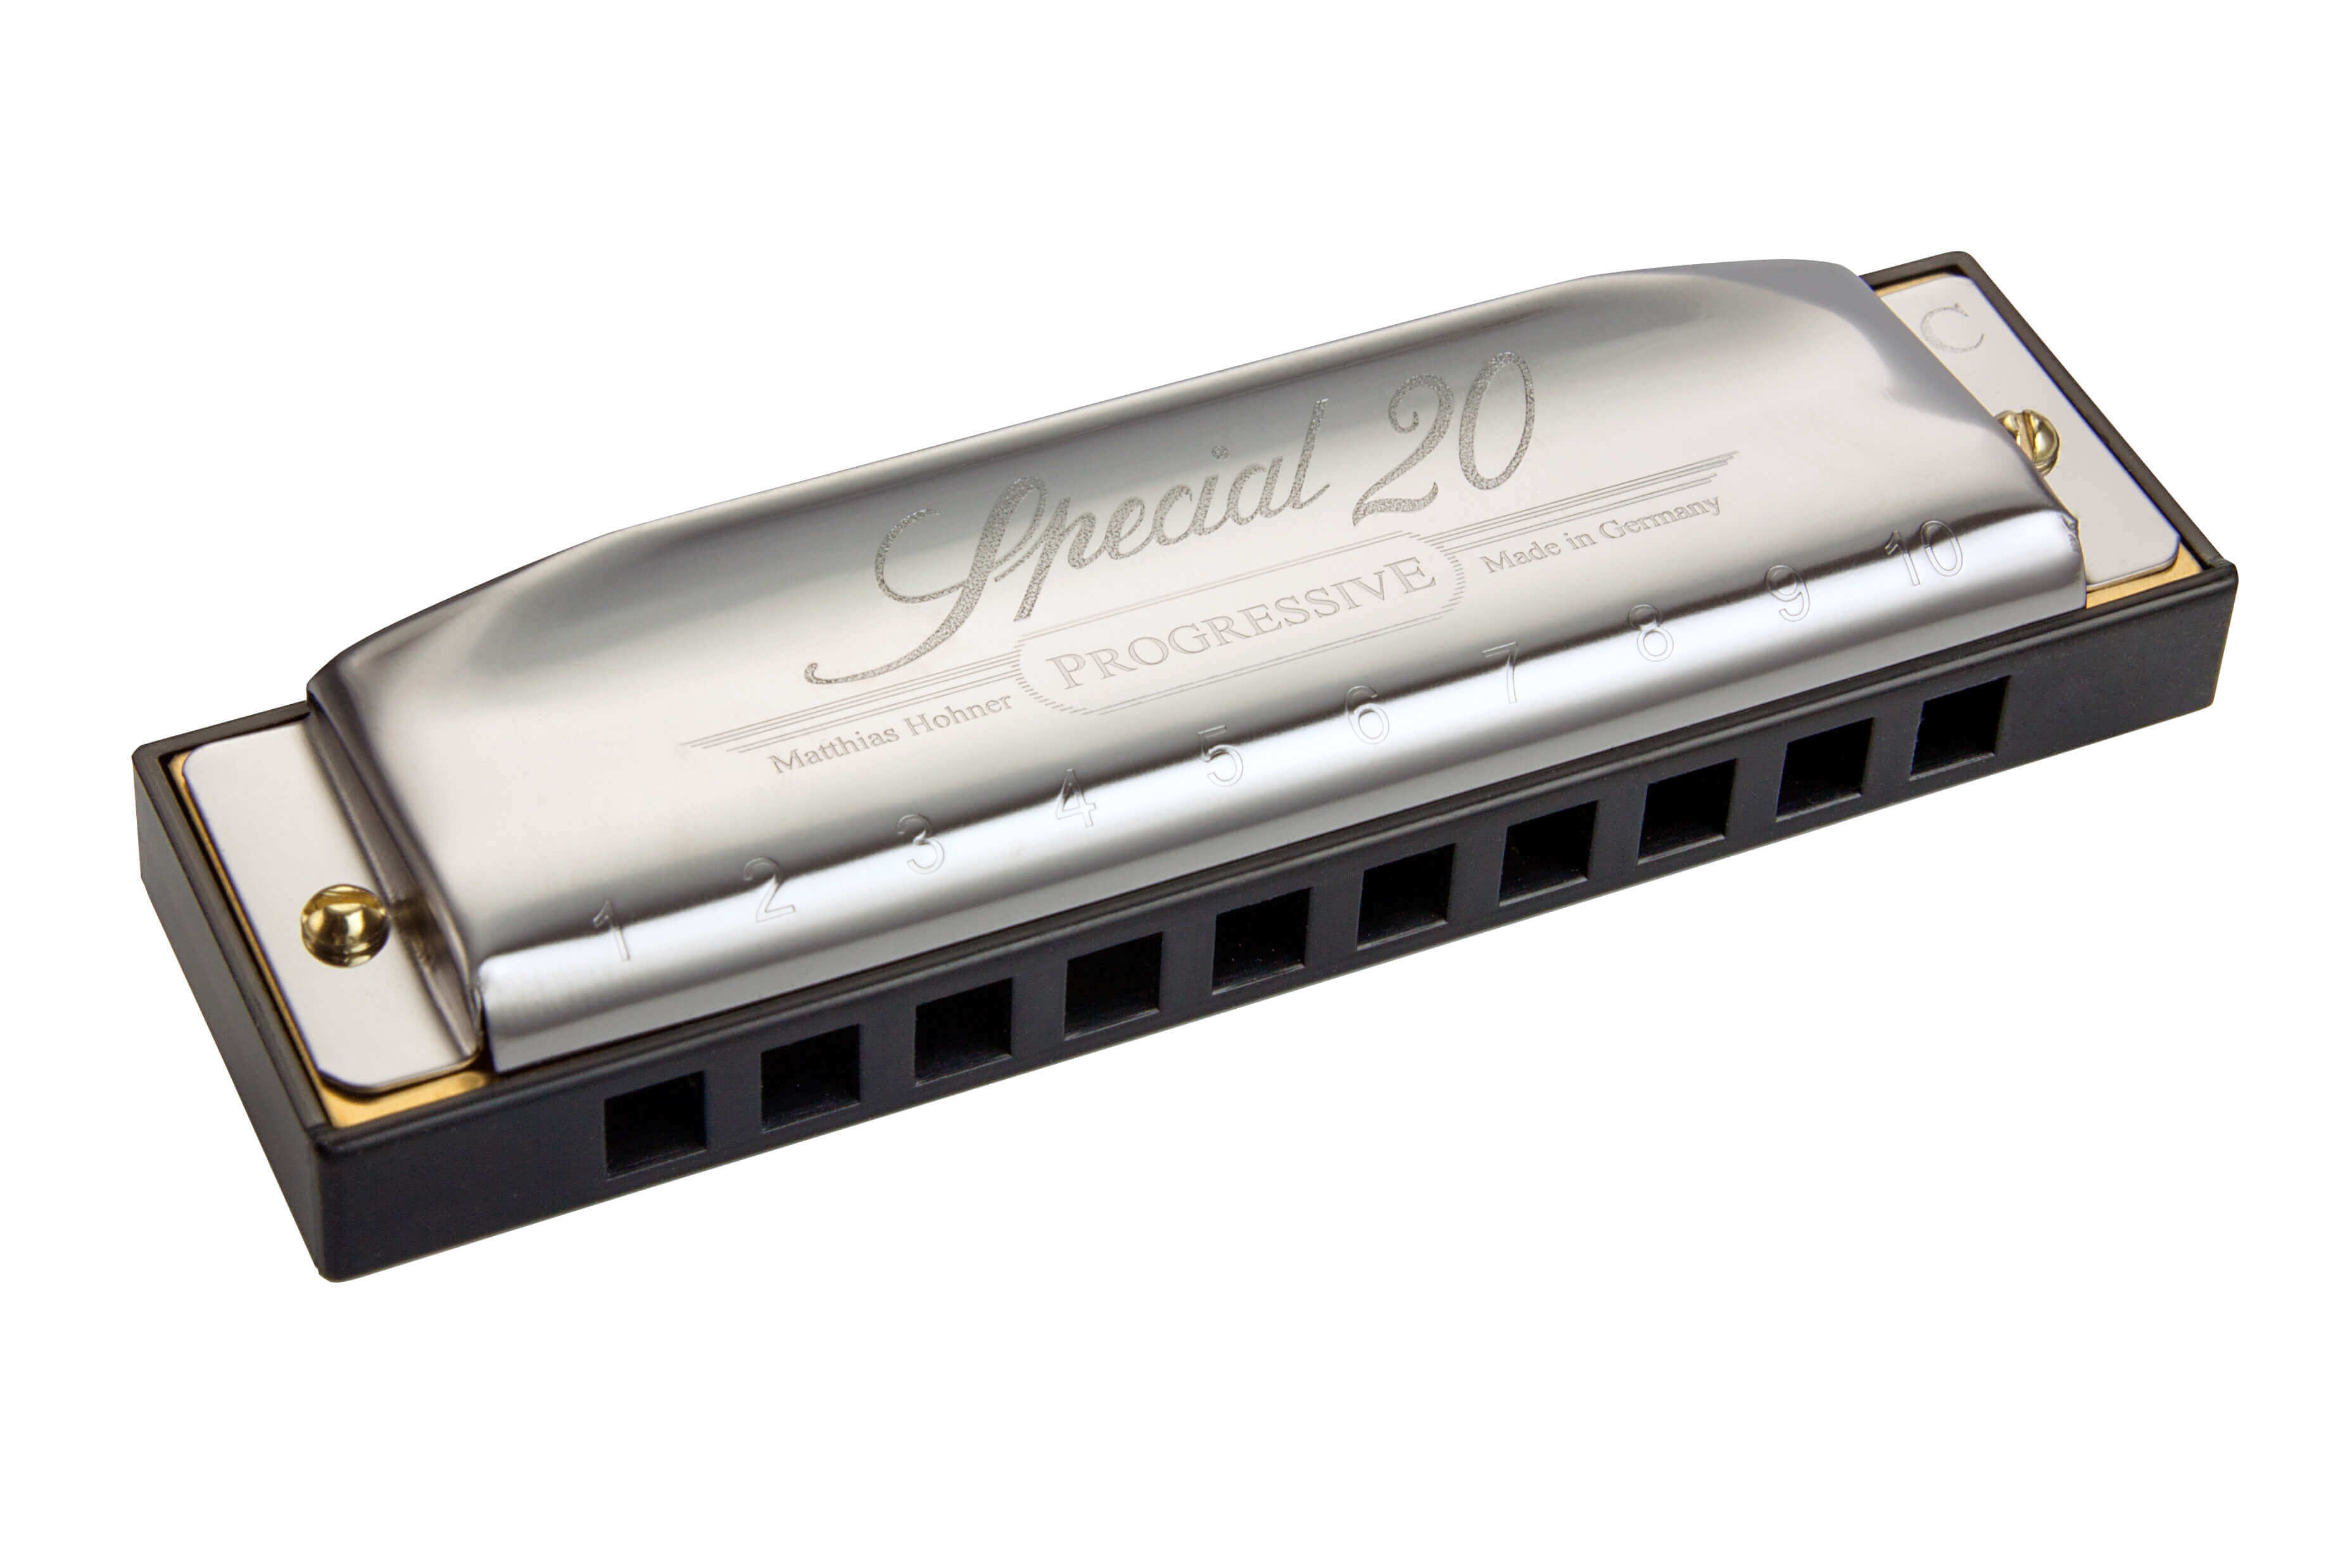 Which Harmonica Is The Best For Beginners?